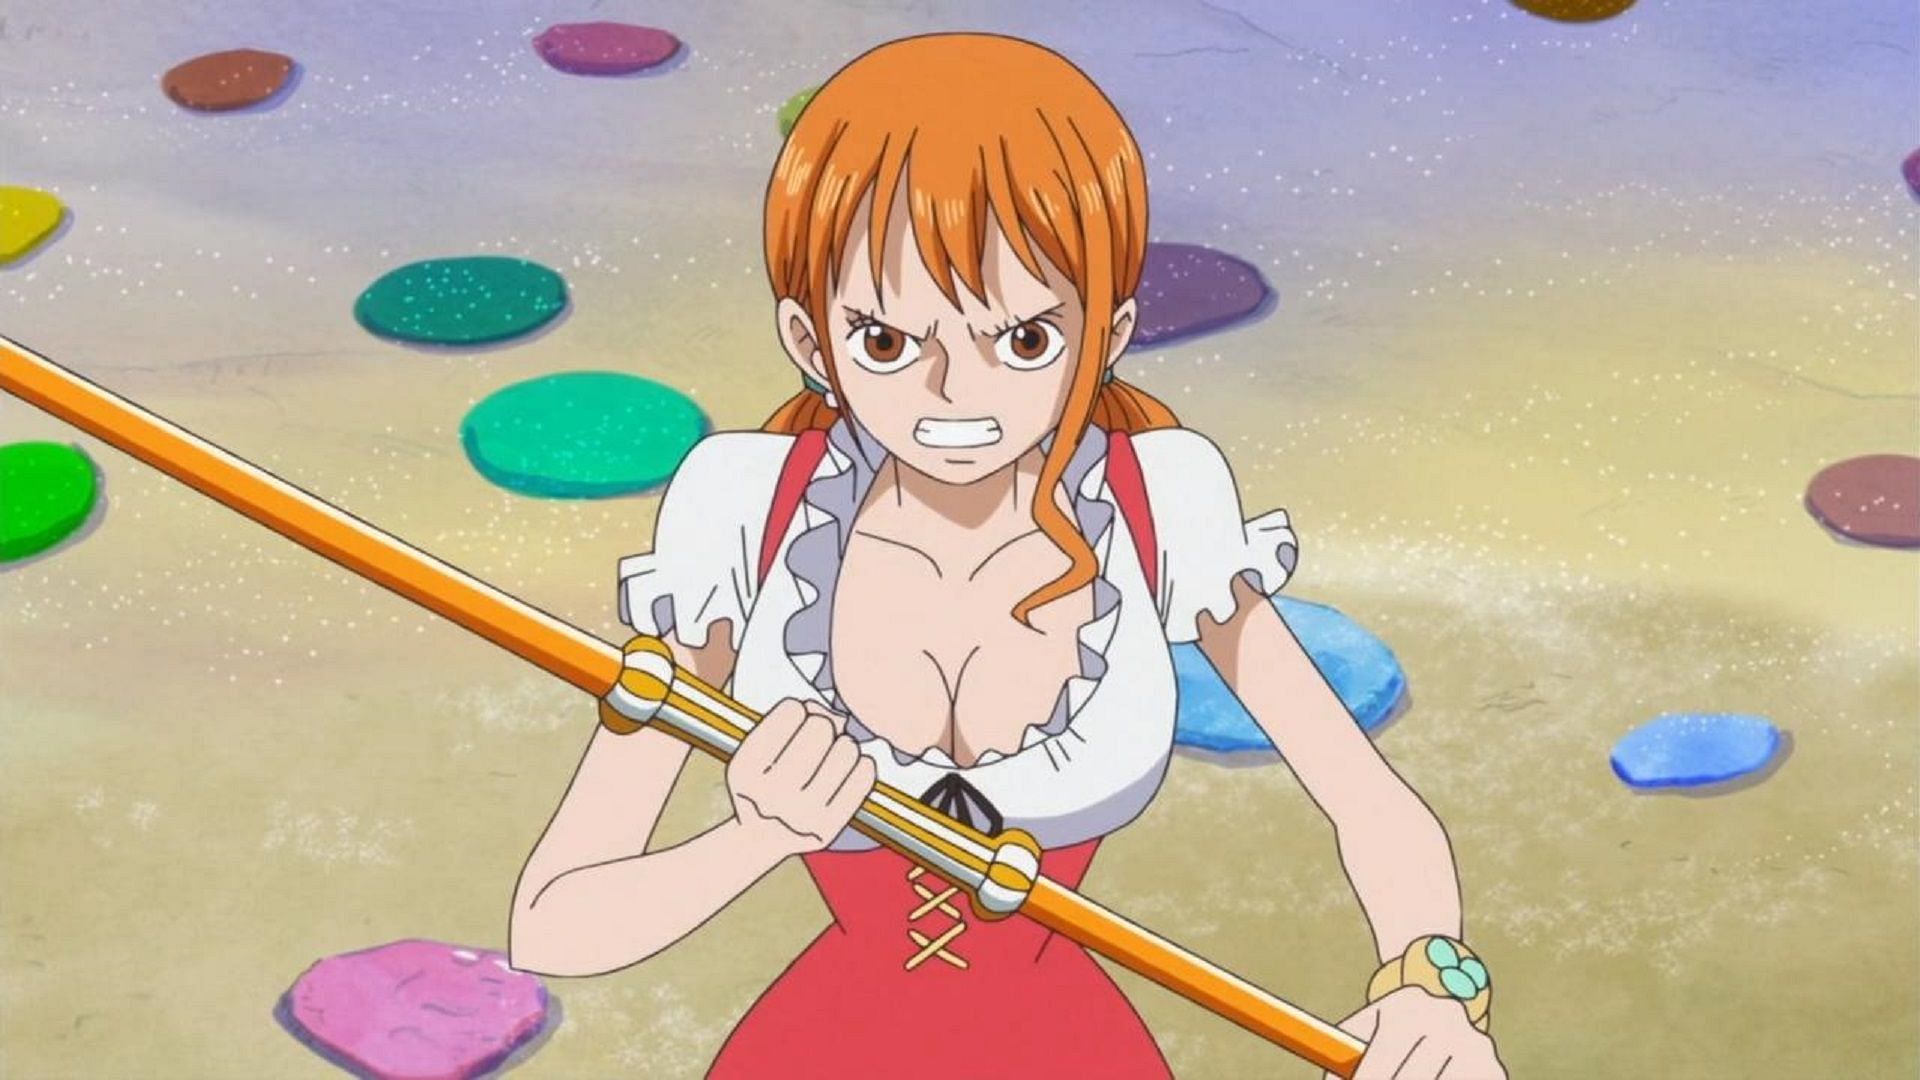 Nami whole cake outfit